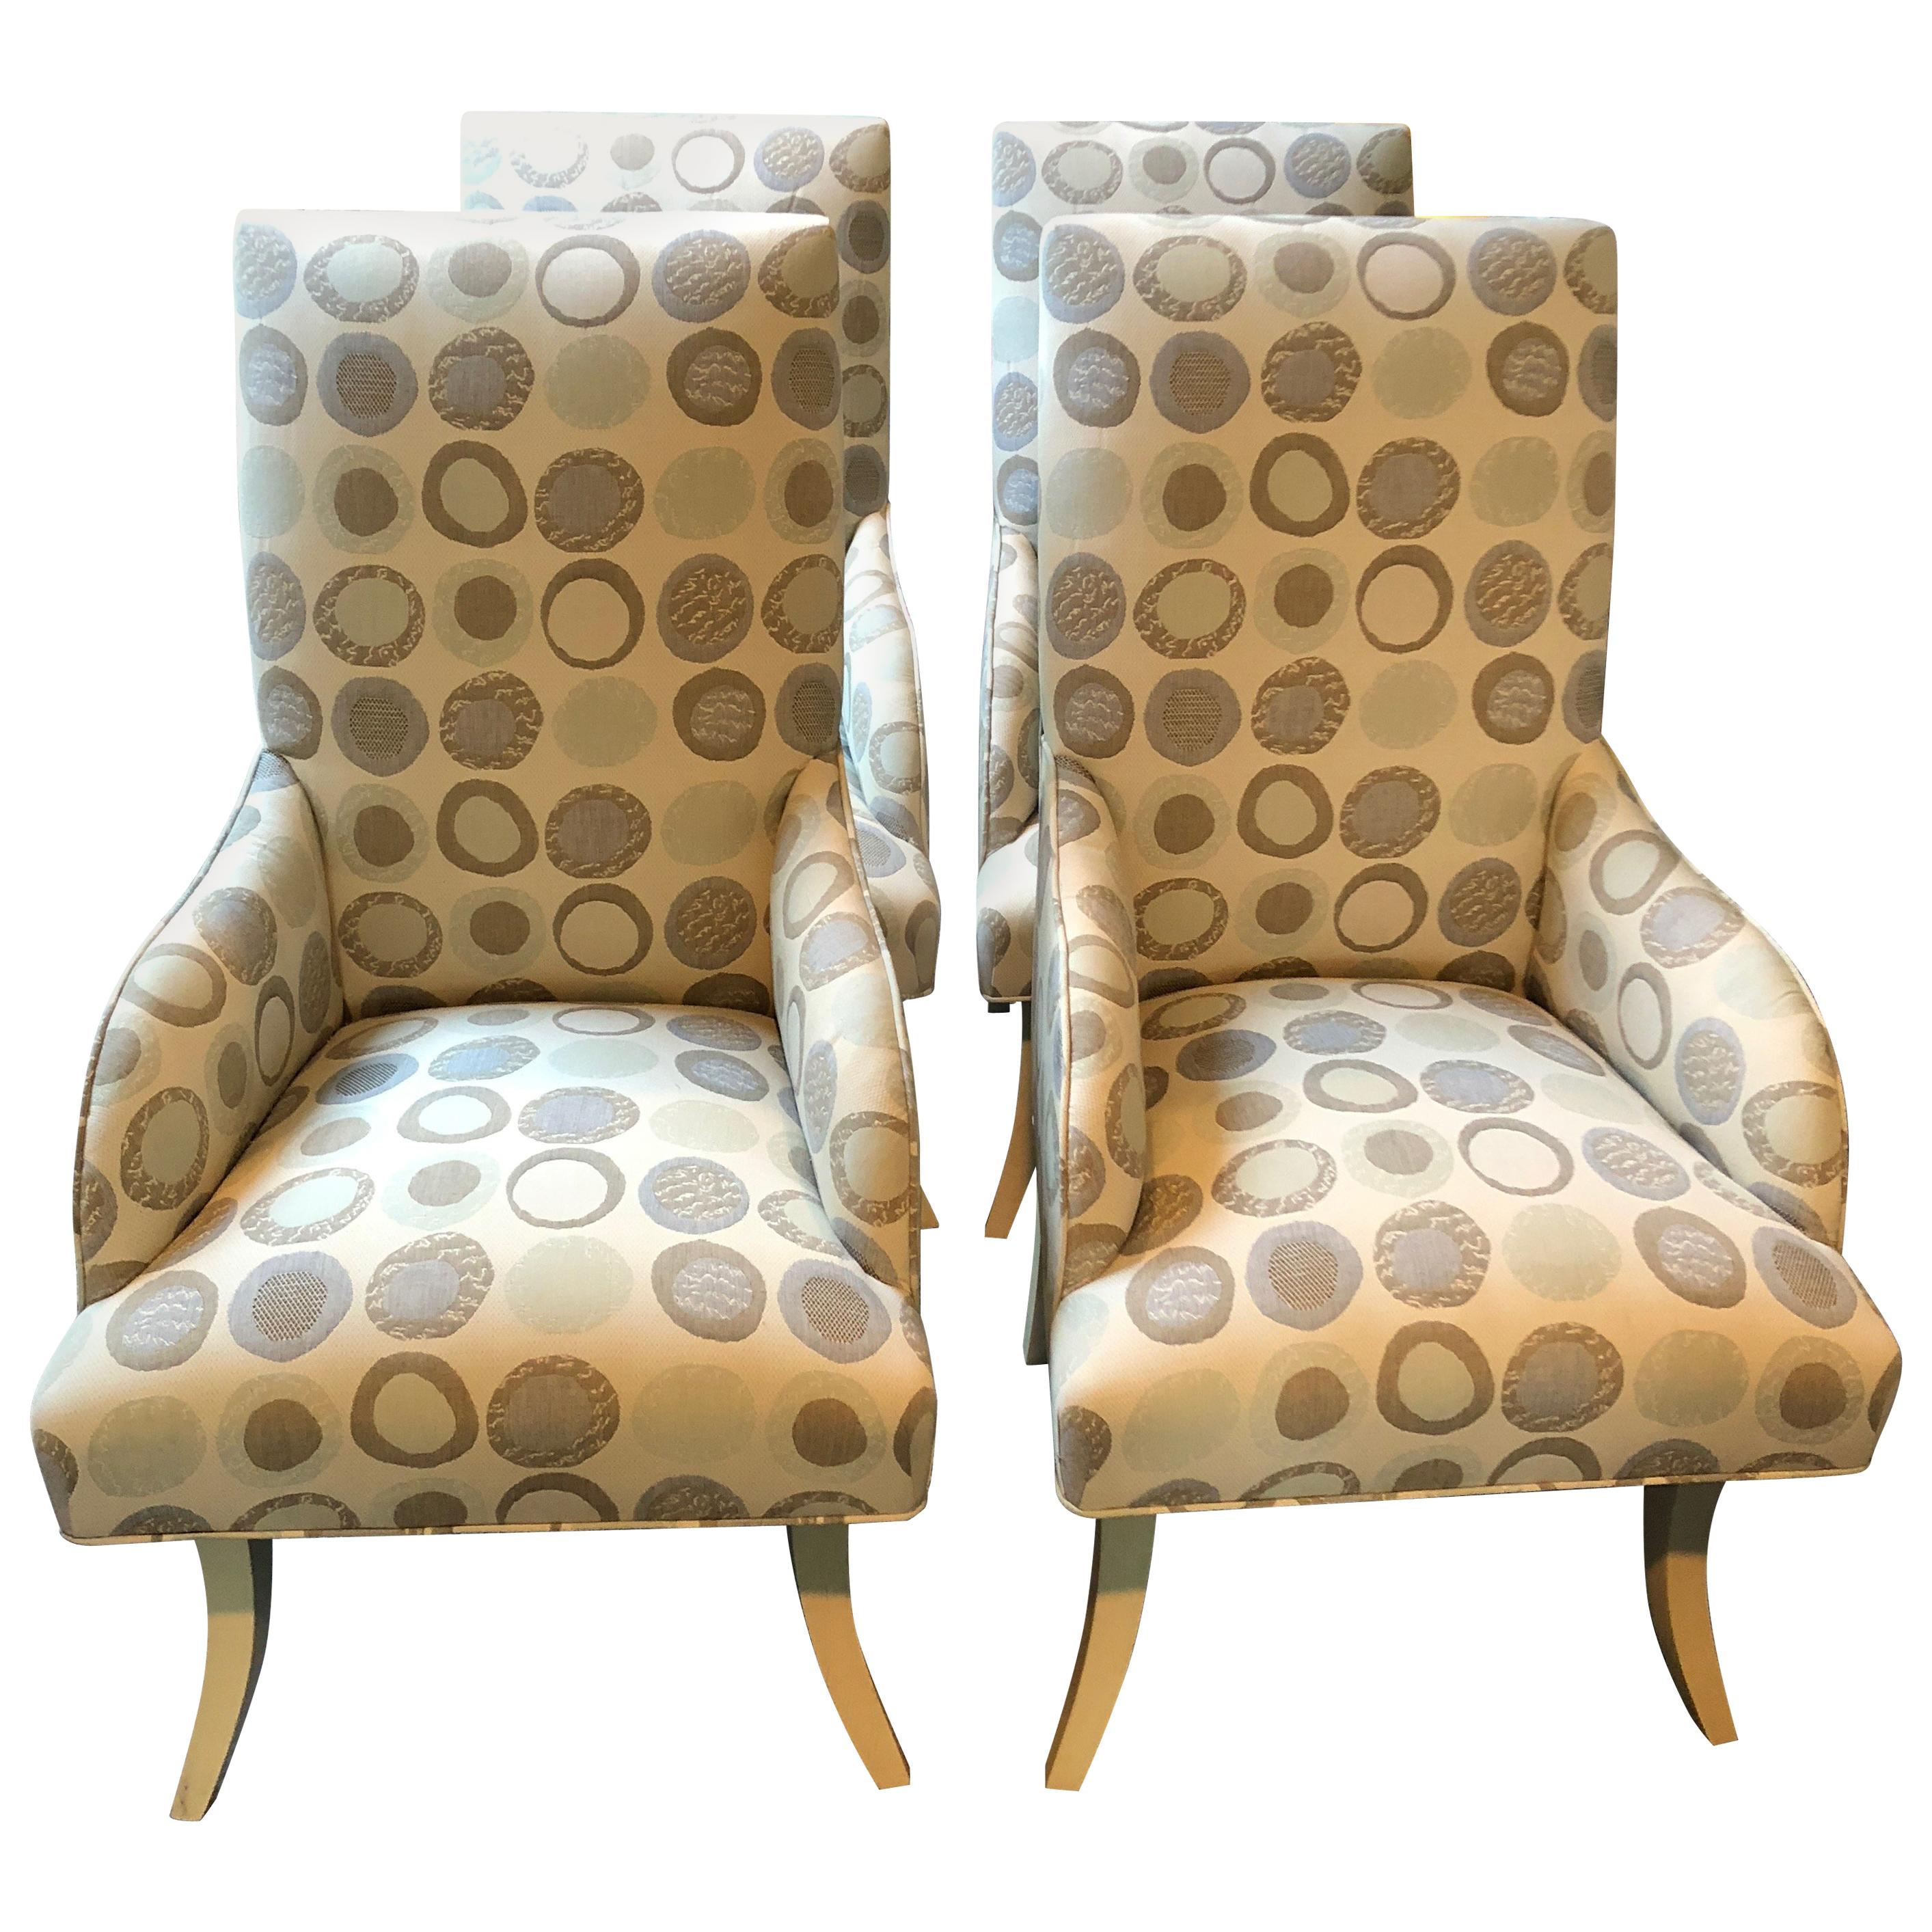 Cool Set of 4 Custom Dining Chairs with Donghia Upholstery